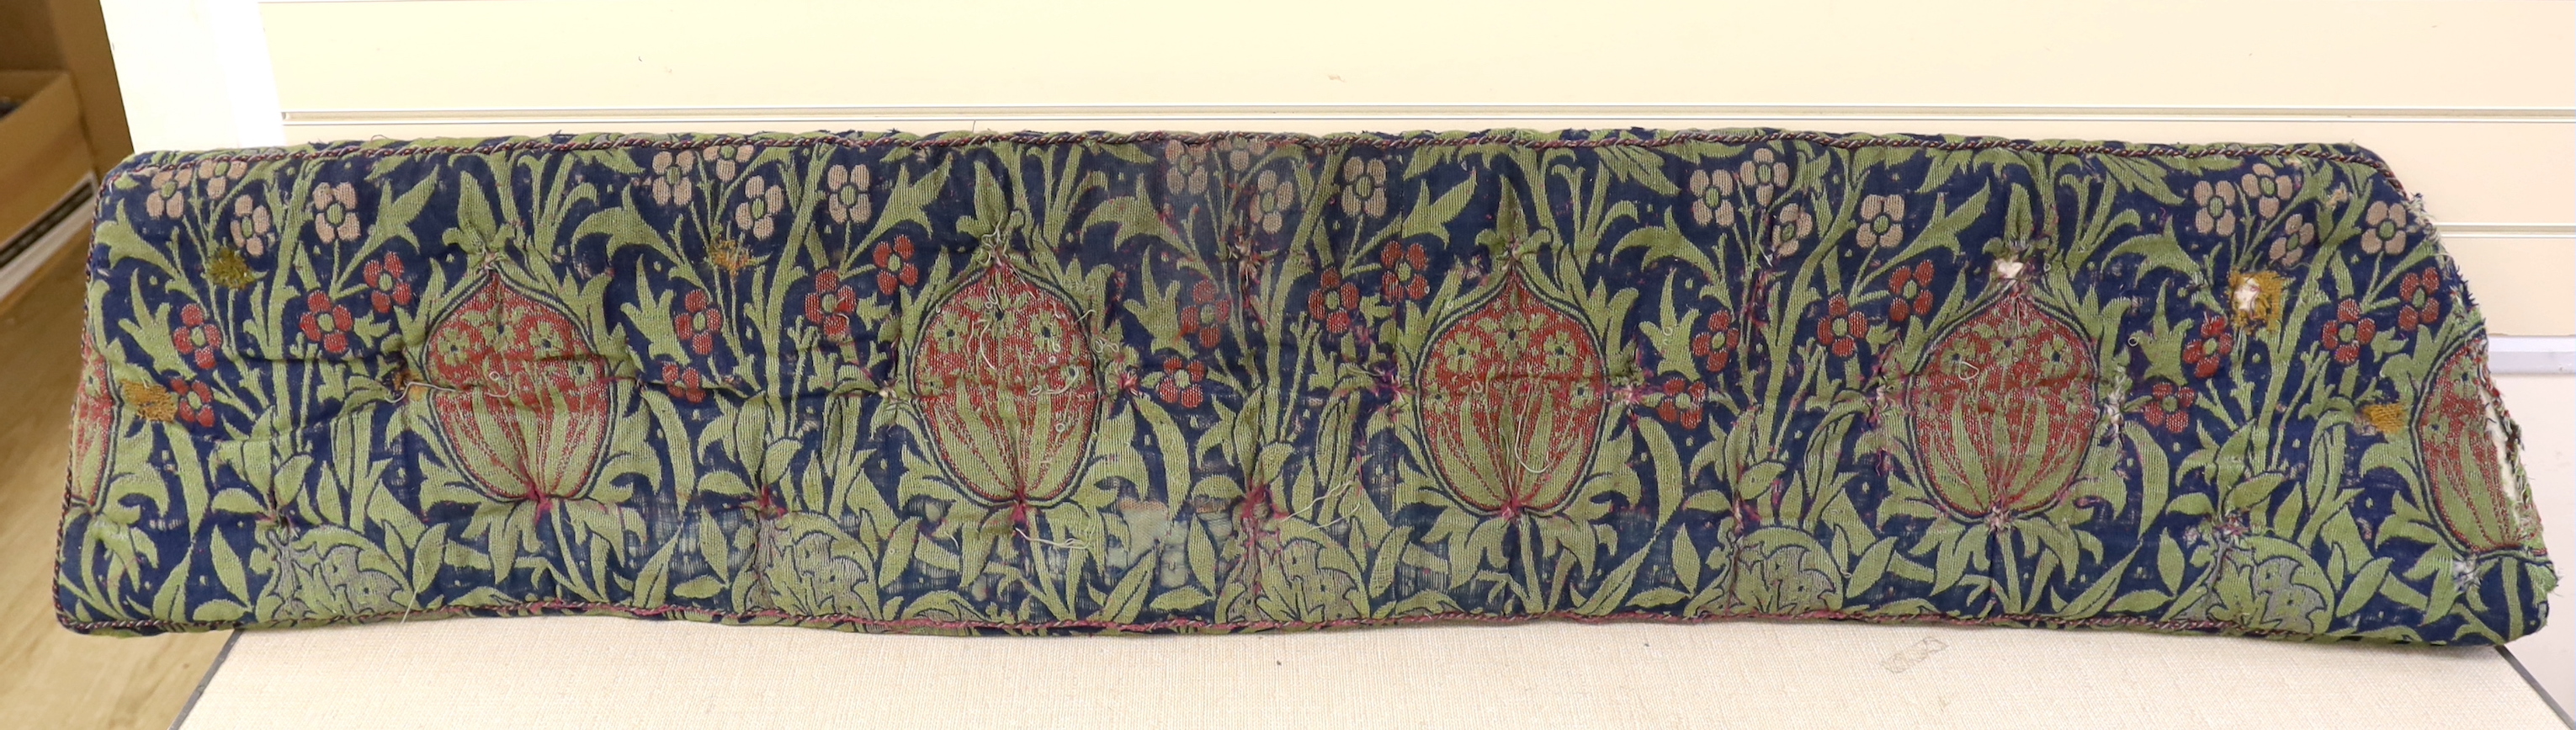 A William Morris Elmore, wool and mohair woven panel by J H Dearle circa 1900, used to cover a buttoned and braided window seat cushion, 196cm wide (at widest point) x 38cm deep, Please note this lot attracts an addition